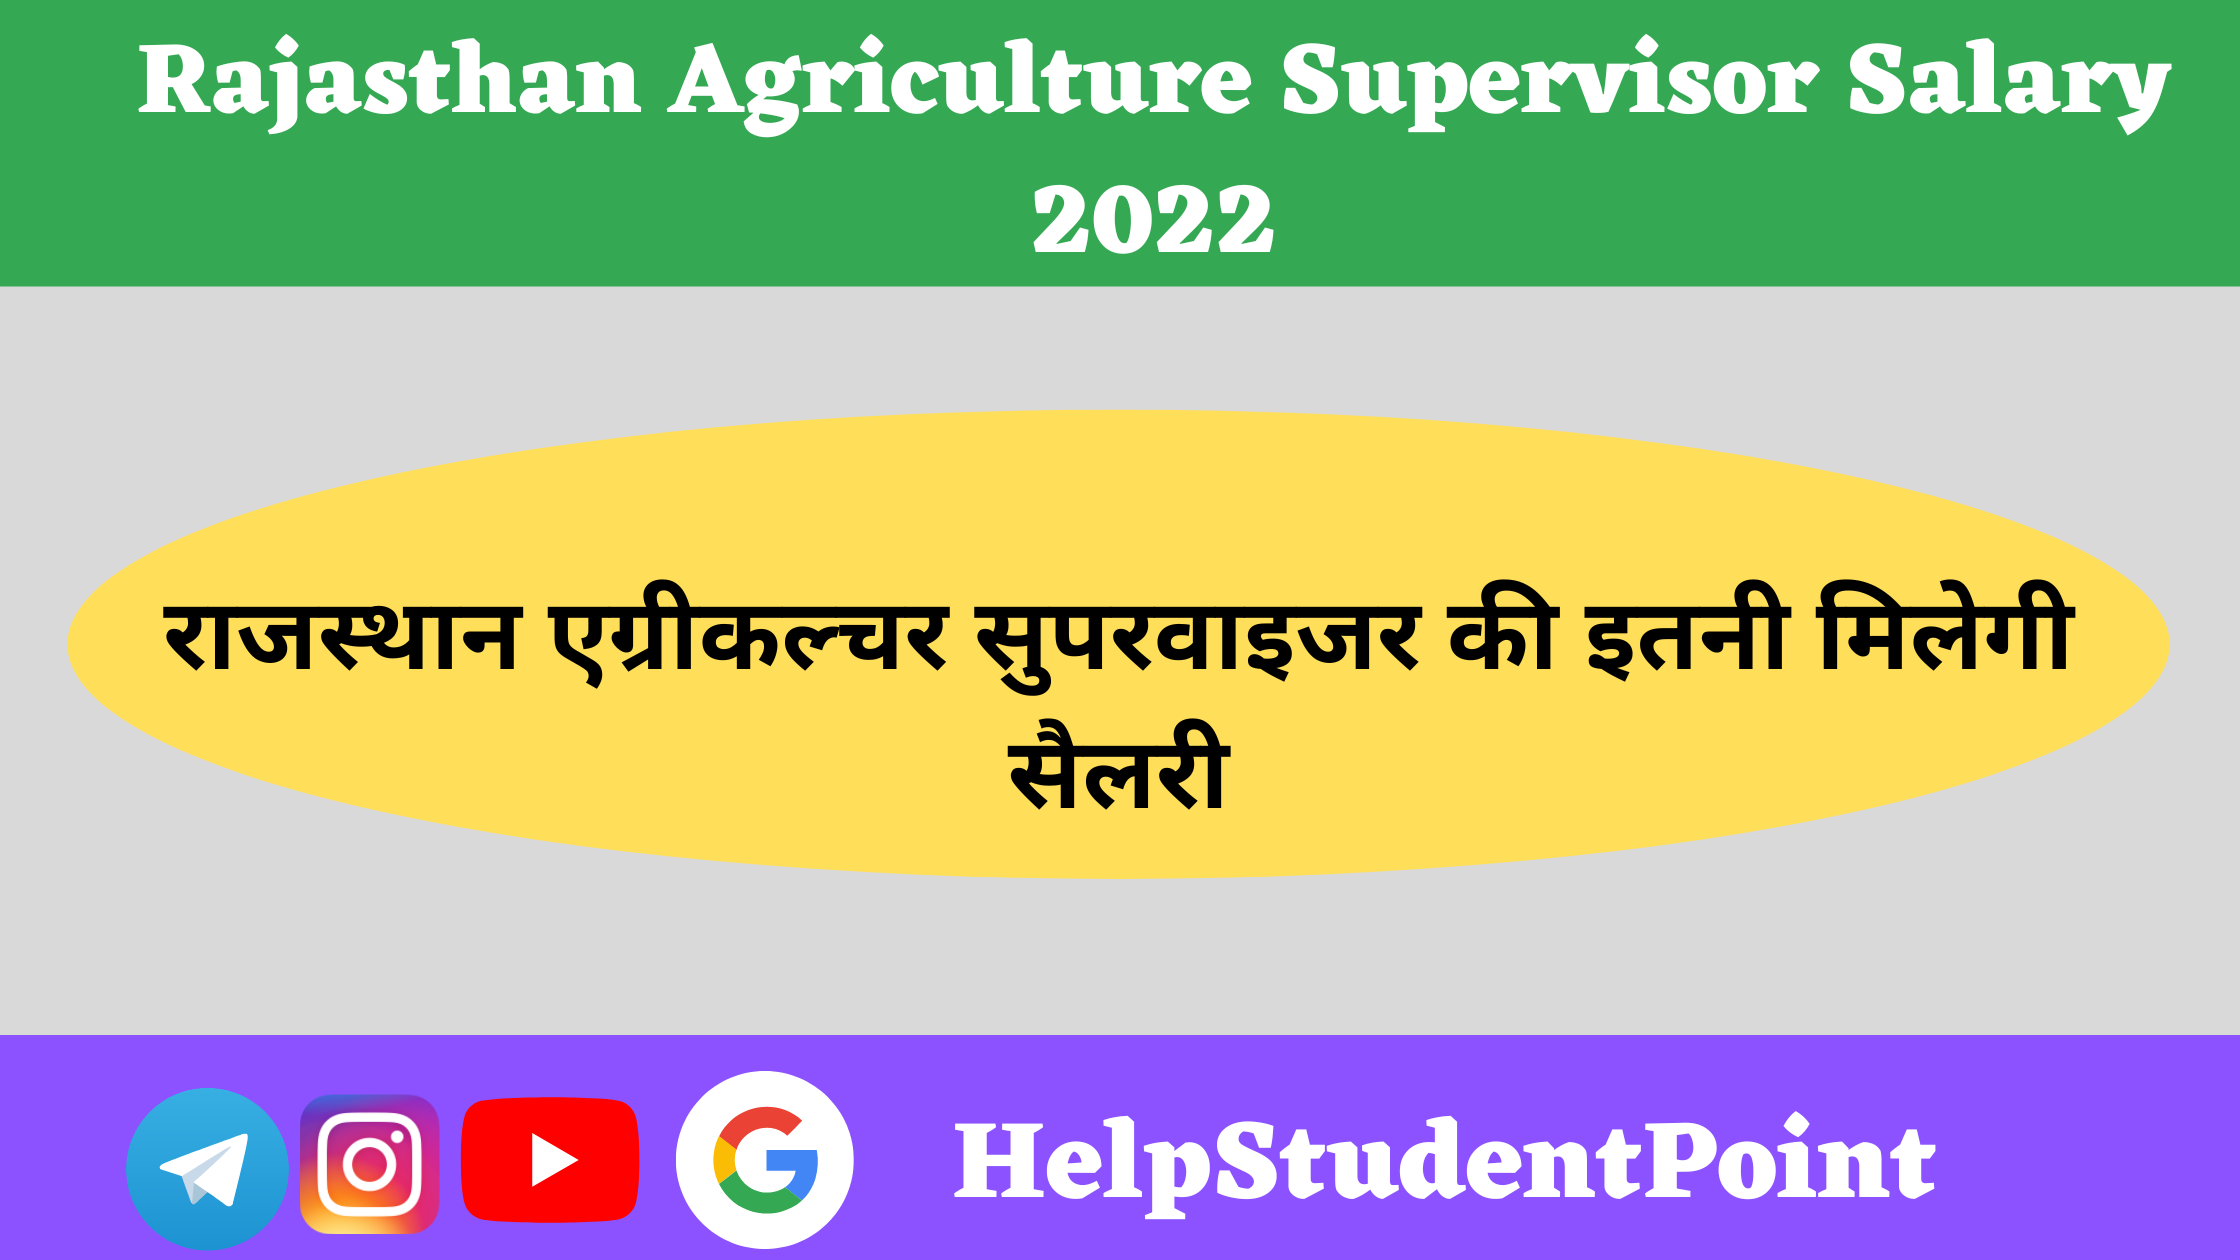 Rajasthan Agriculture Supervisor Salary 2022